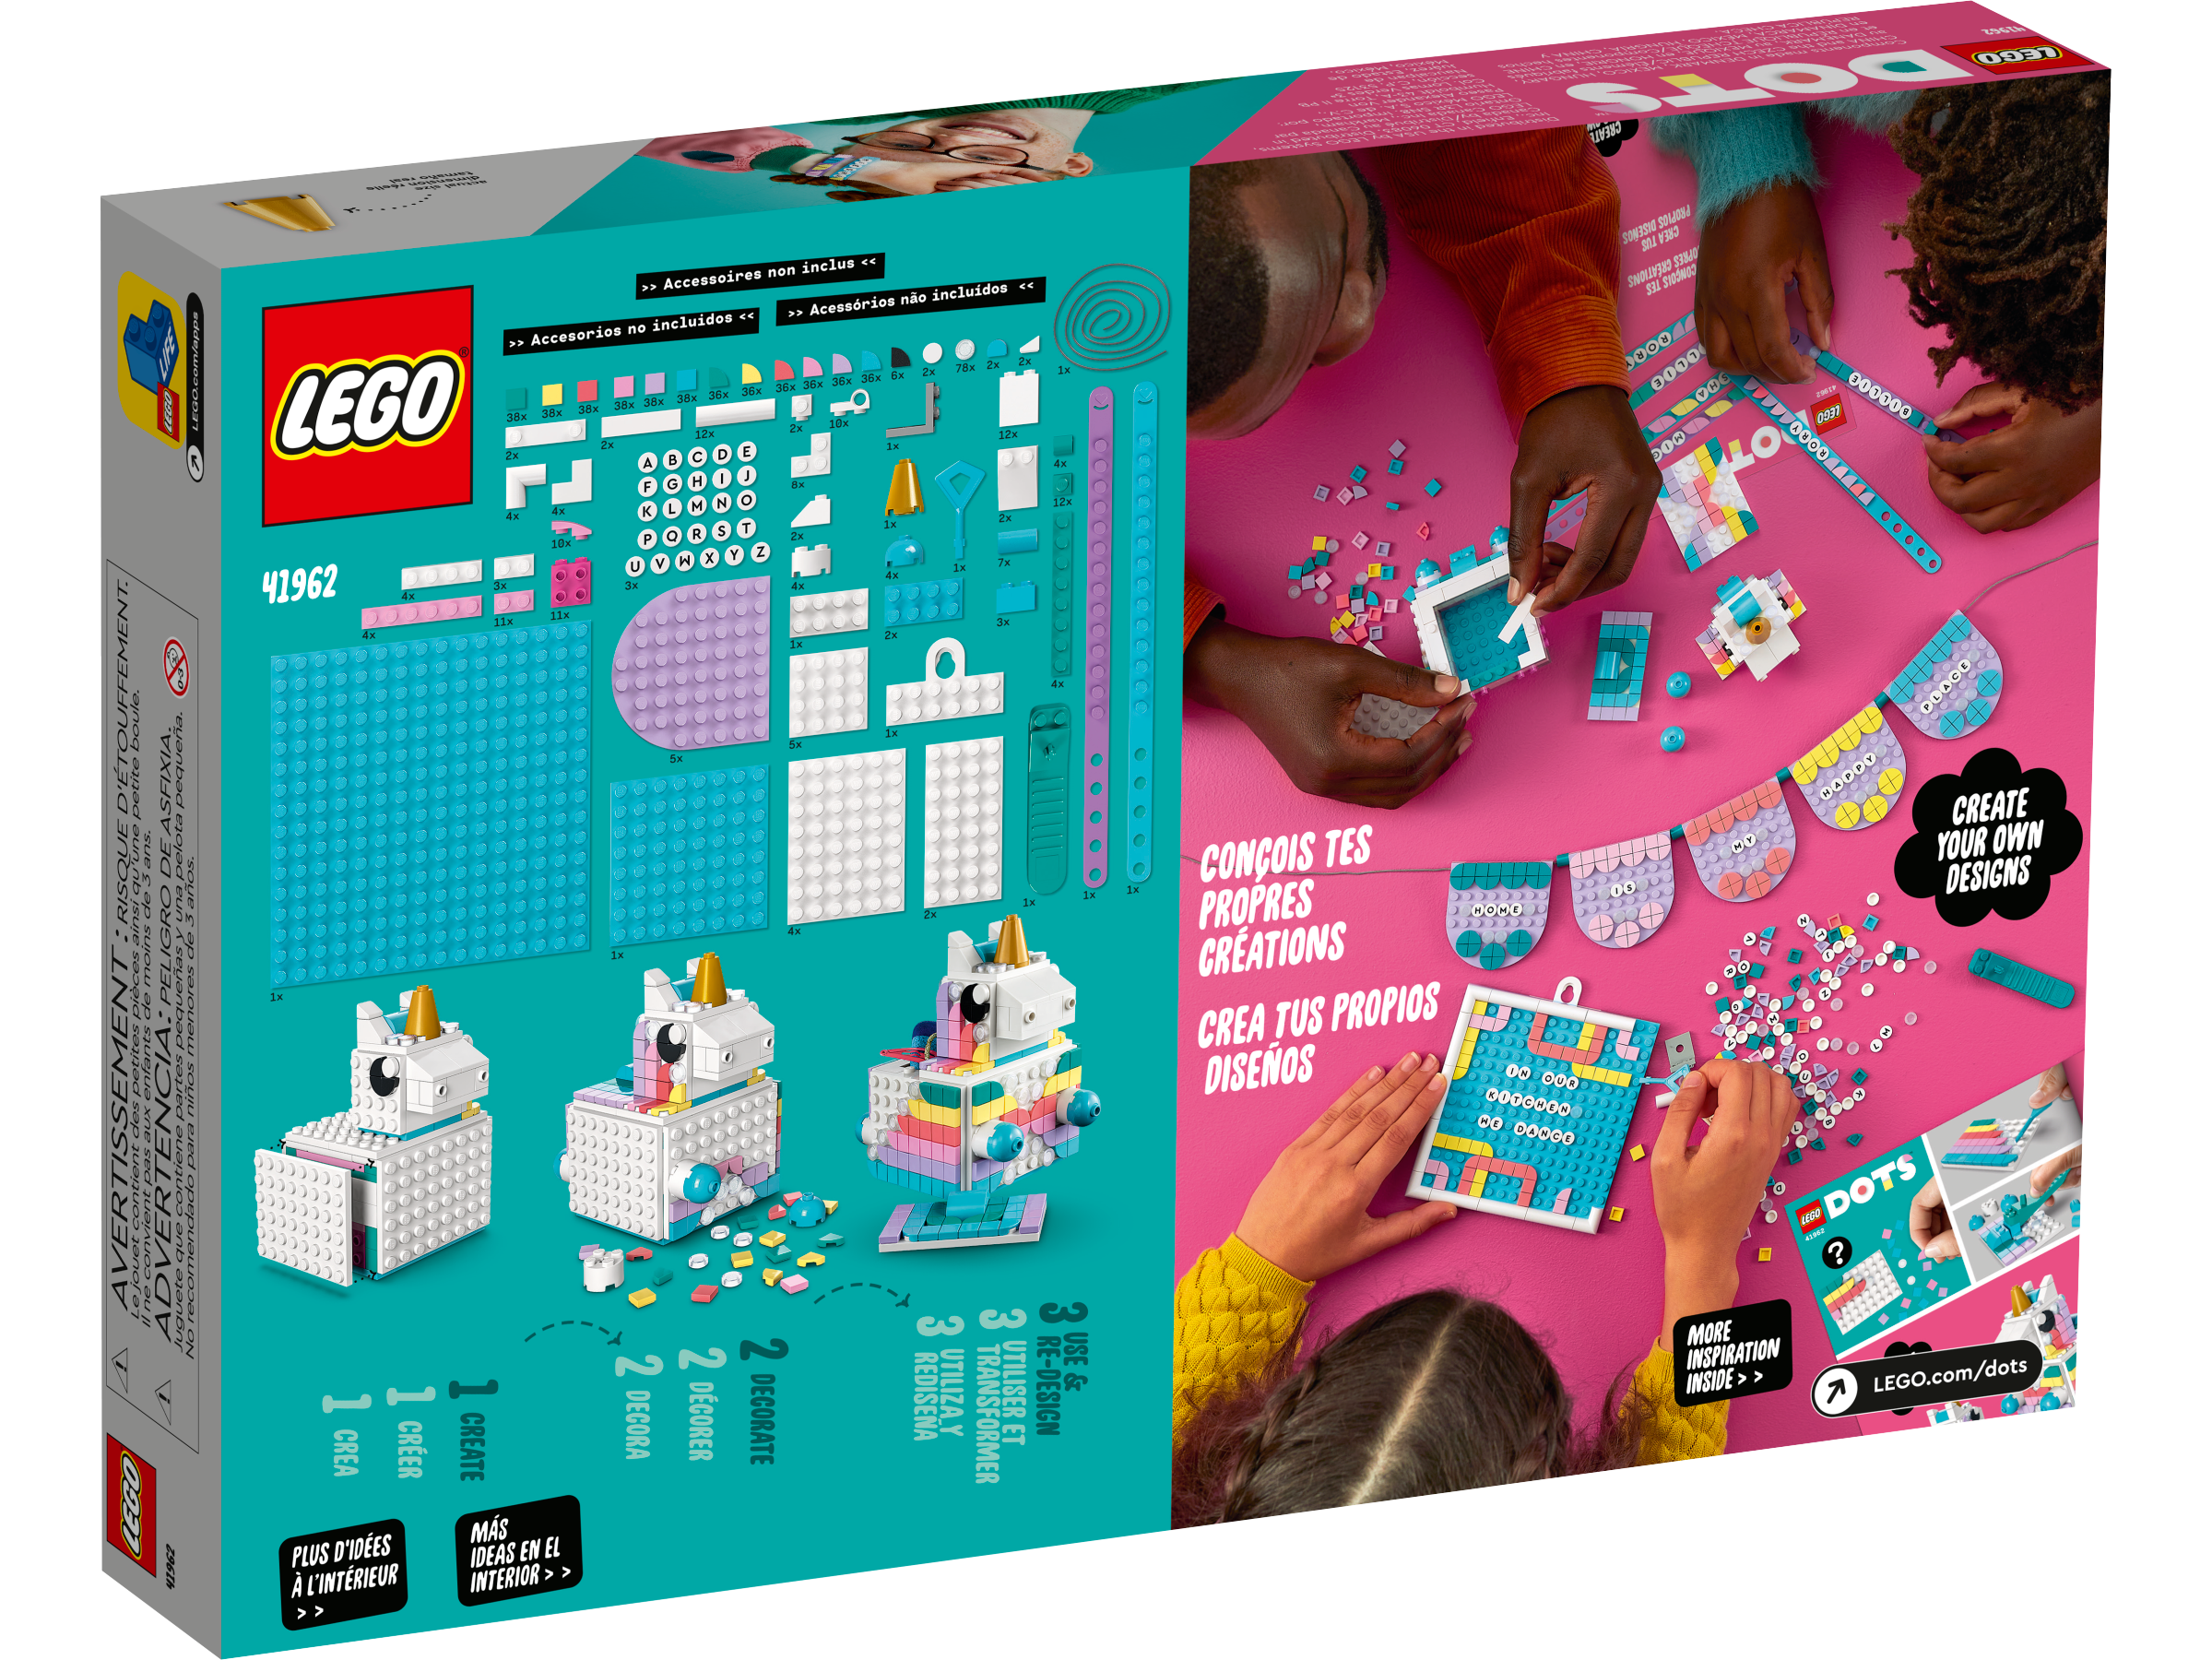 Unicorn Creative LEGO® Buy | | online the Pack Shop DOTS US 41962 Official Family at